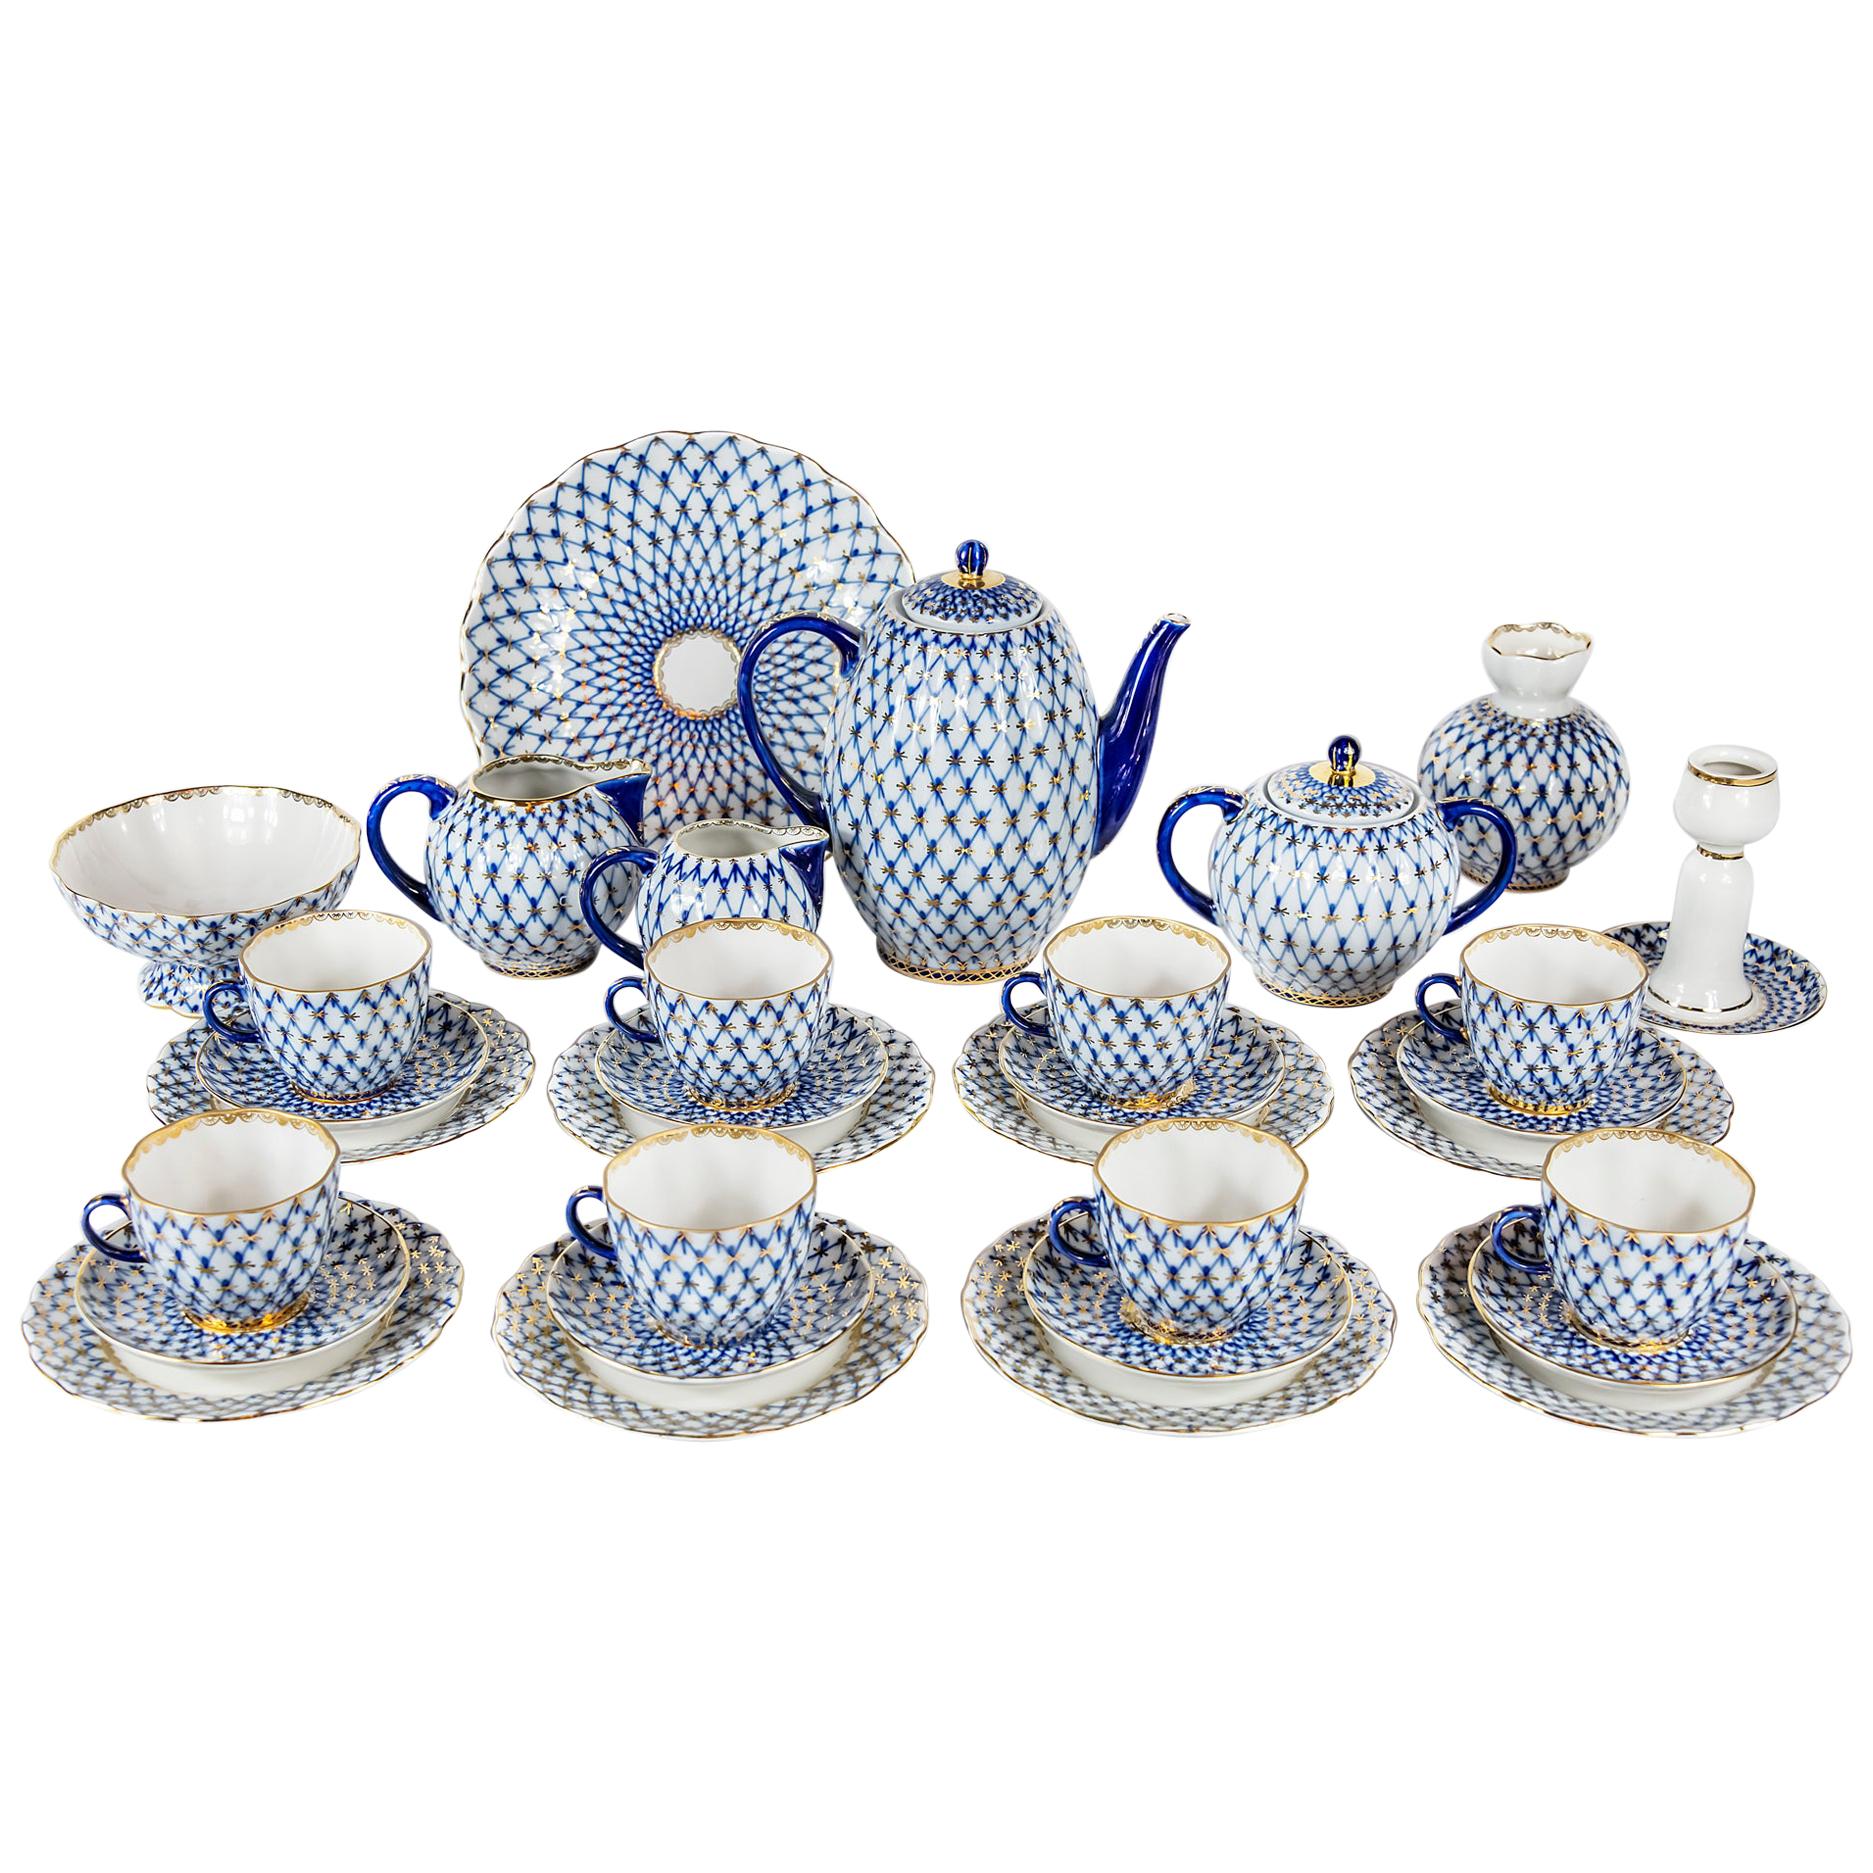 Coffee Set for 8 Persons by Russian Porcelain Factory LFZ